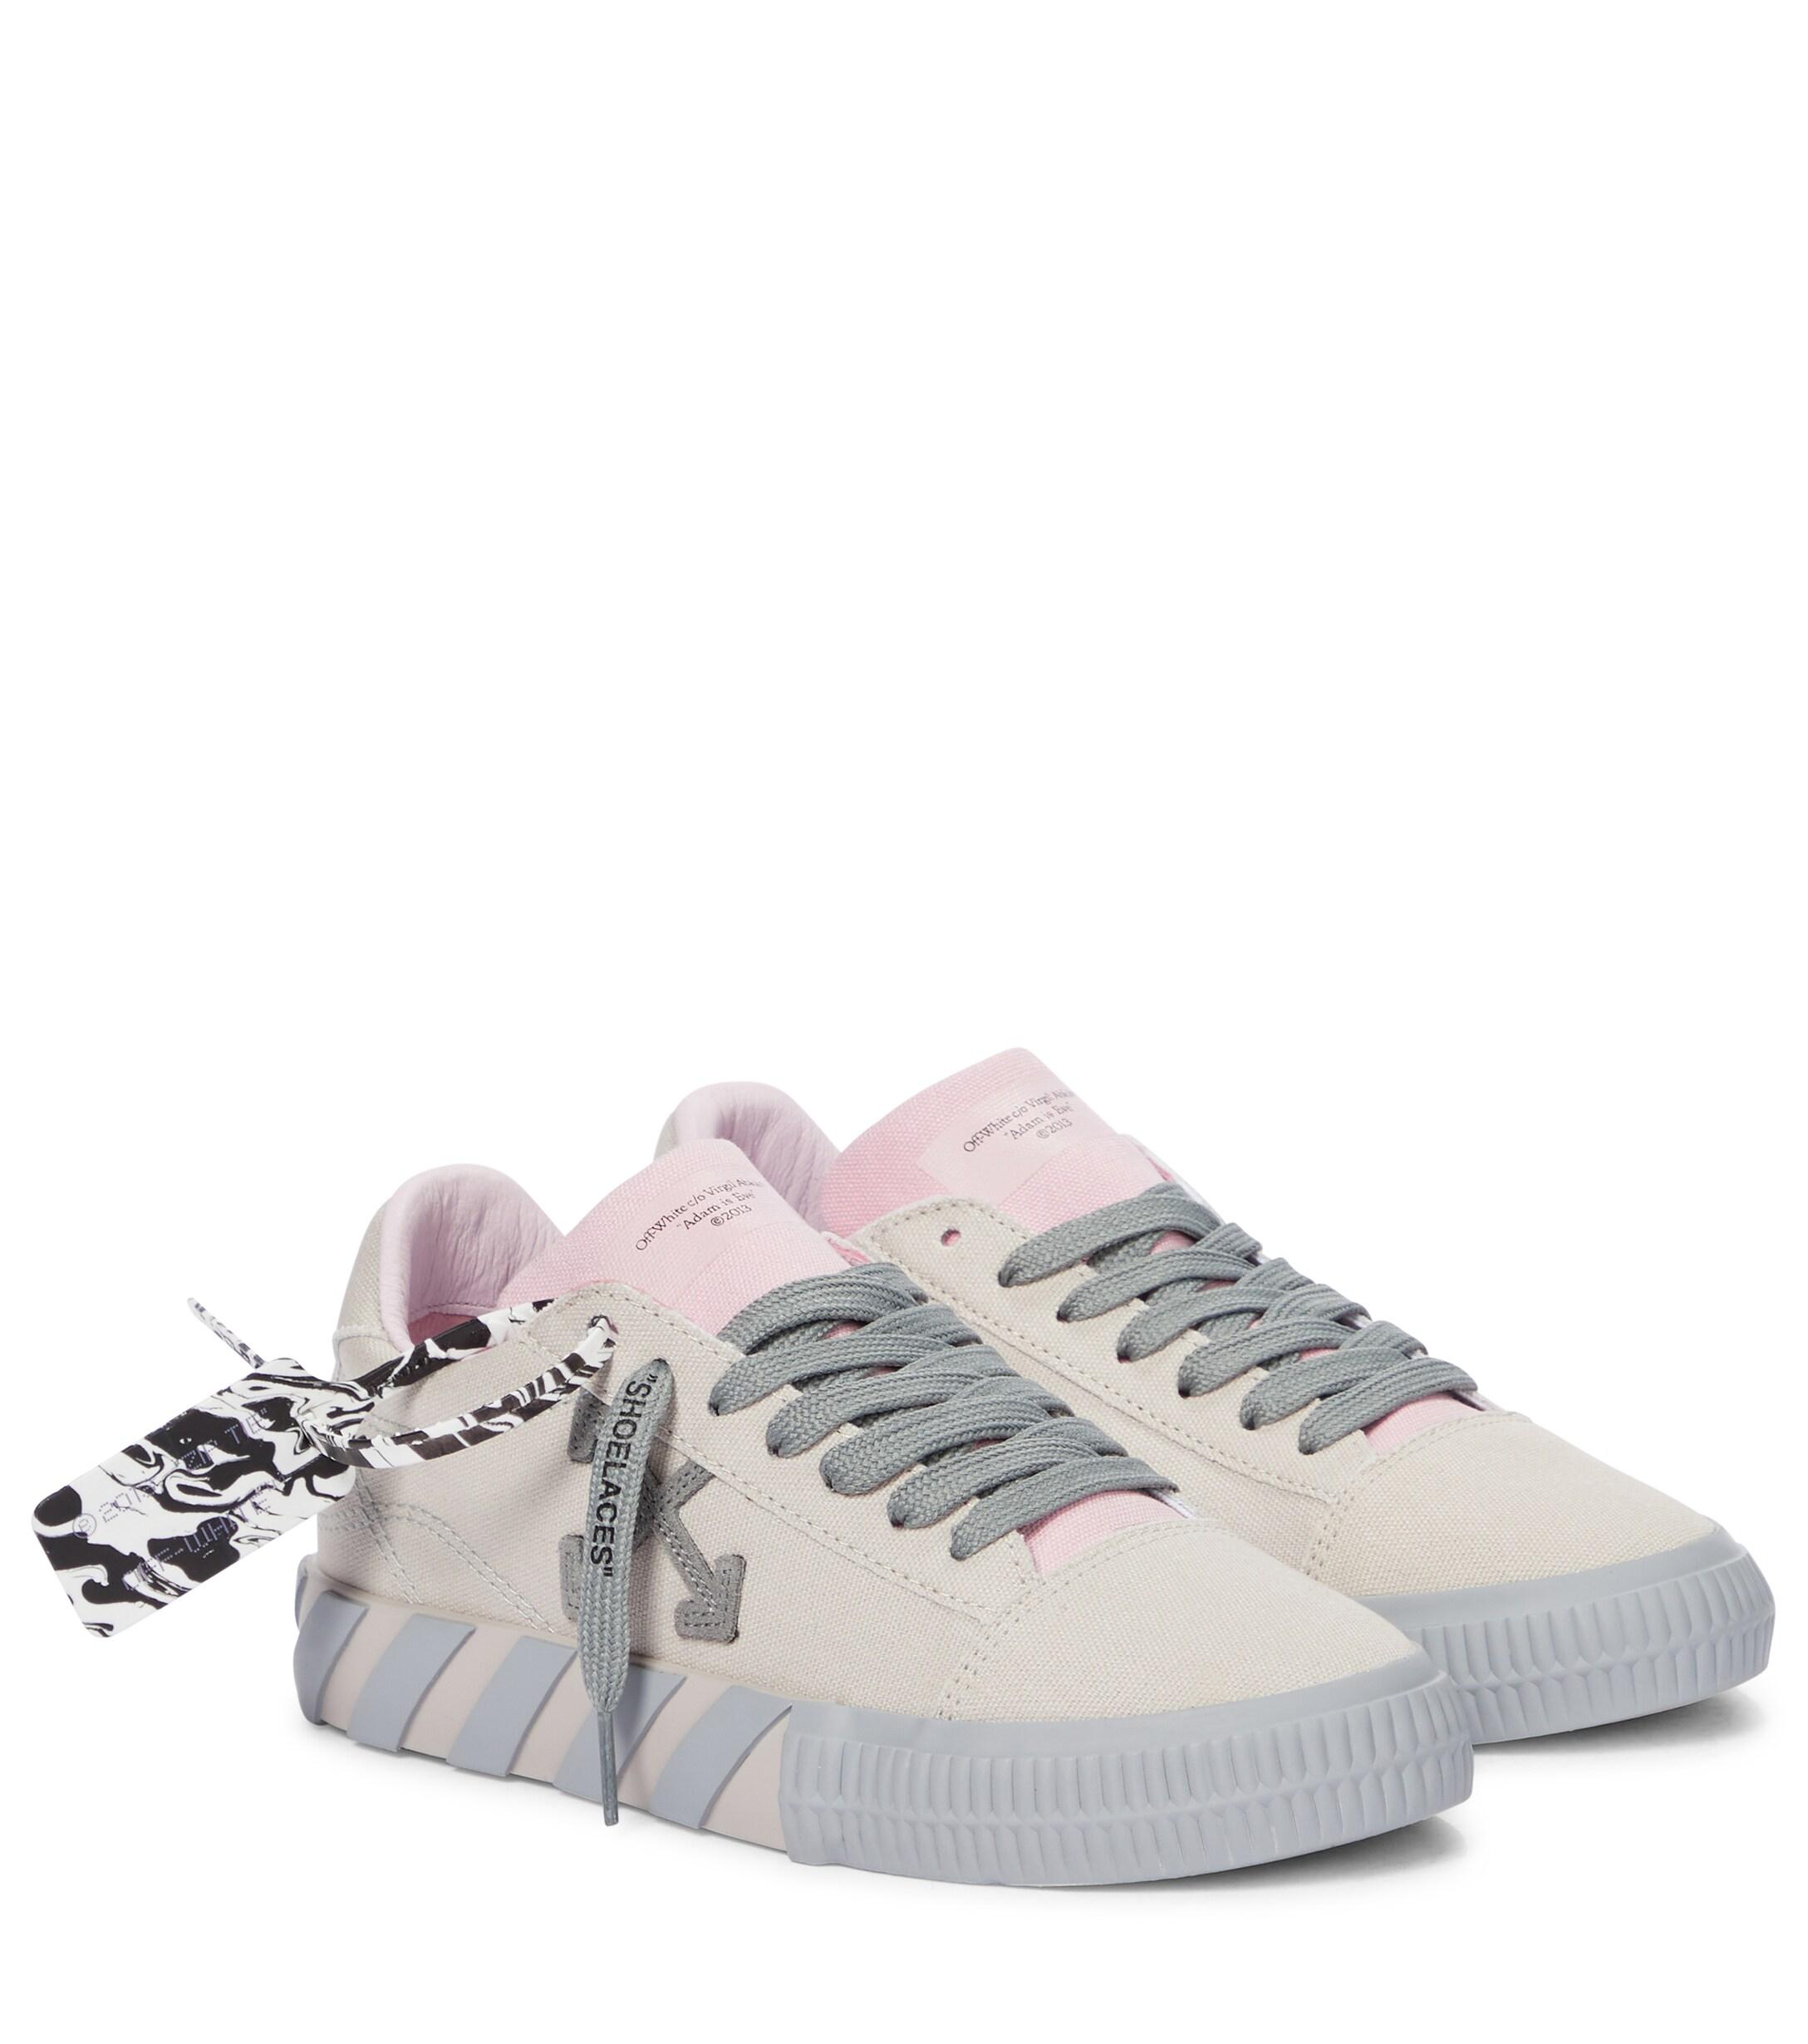 Off-White c/o Virgil Abloh Vulcanized Canvas Sneakers in Beige (Natural) |  Lyst